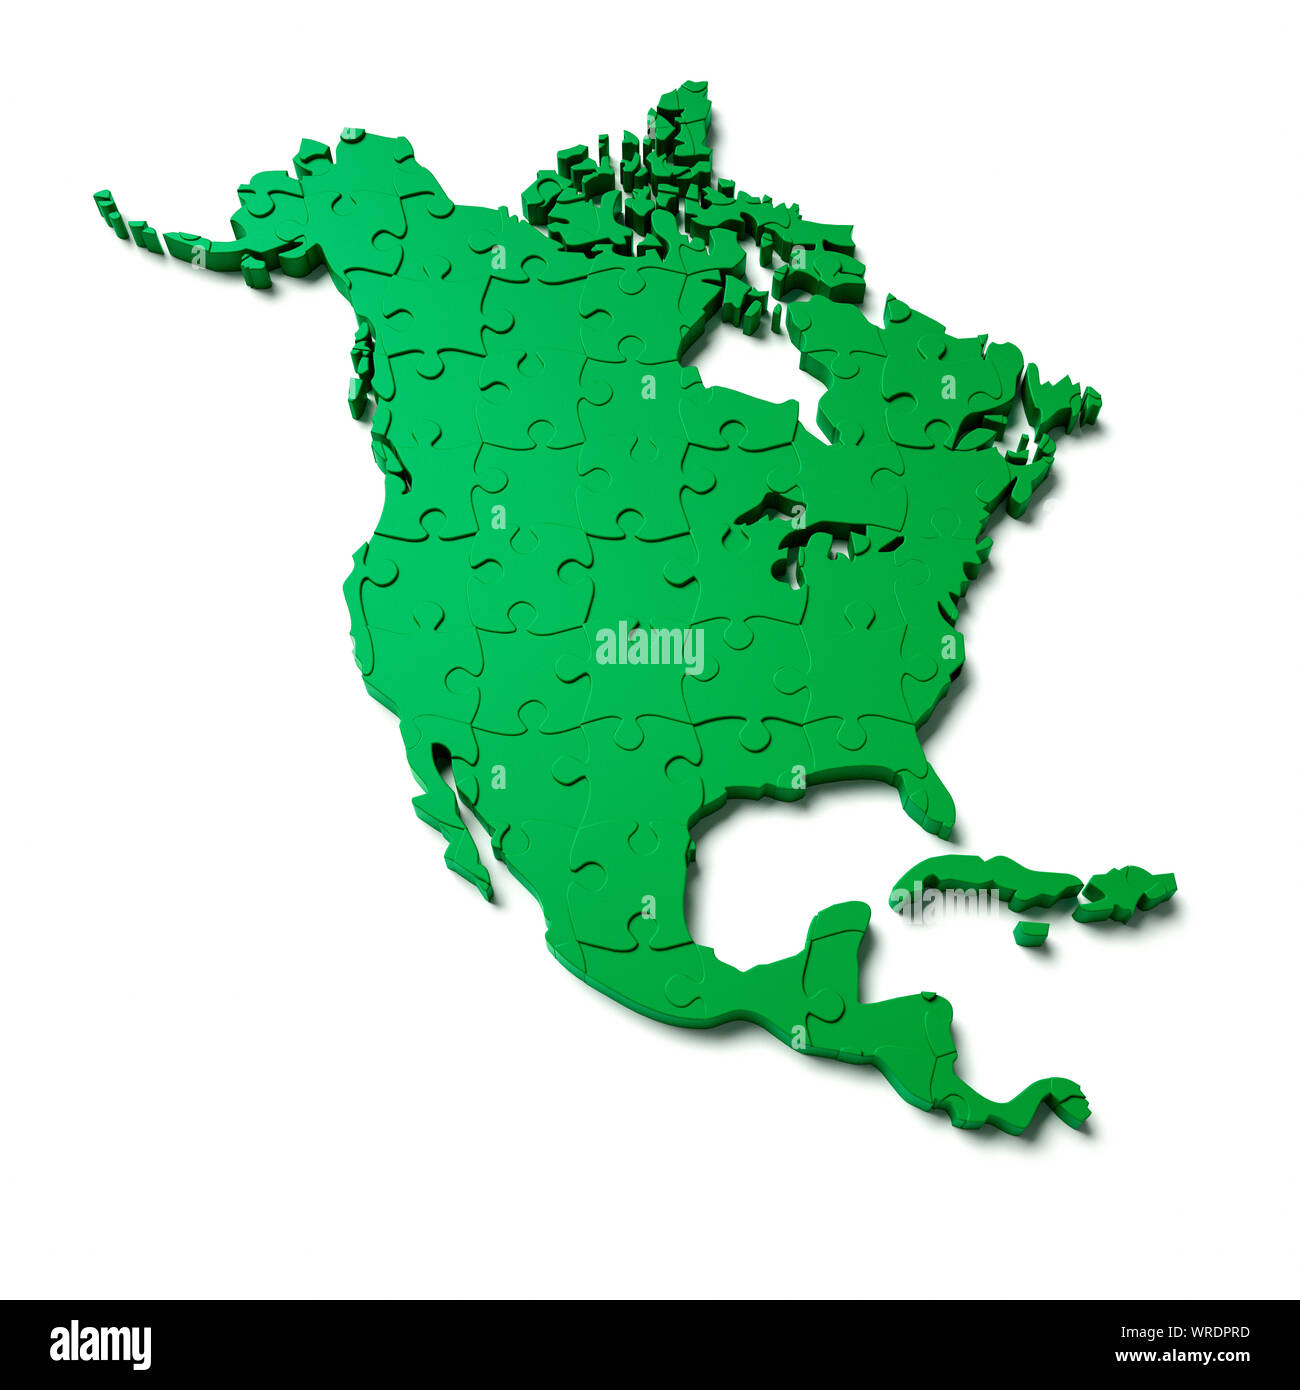 Continent of North America as a green jigsaw puzzle Stock Photo